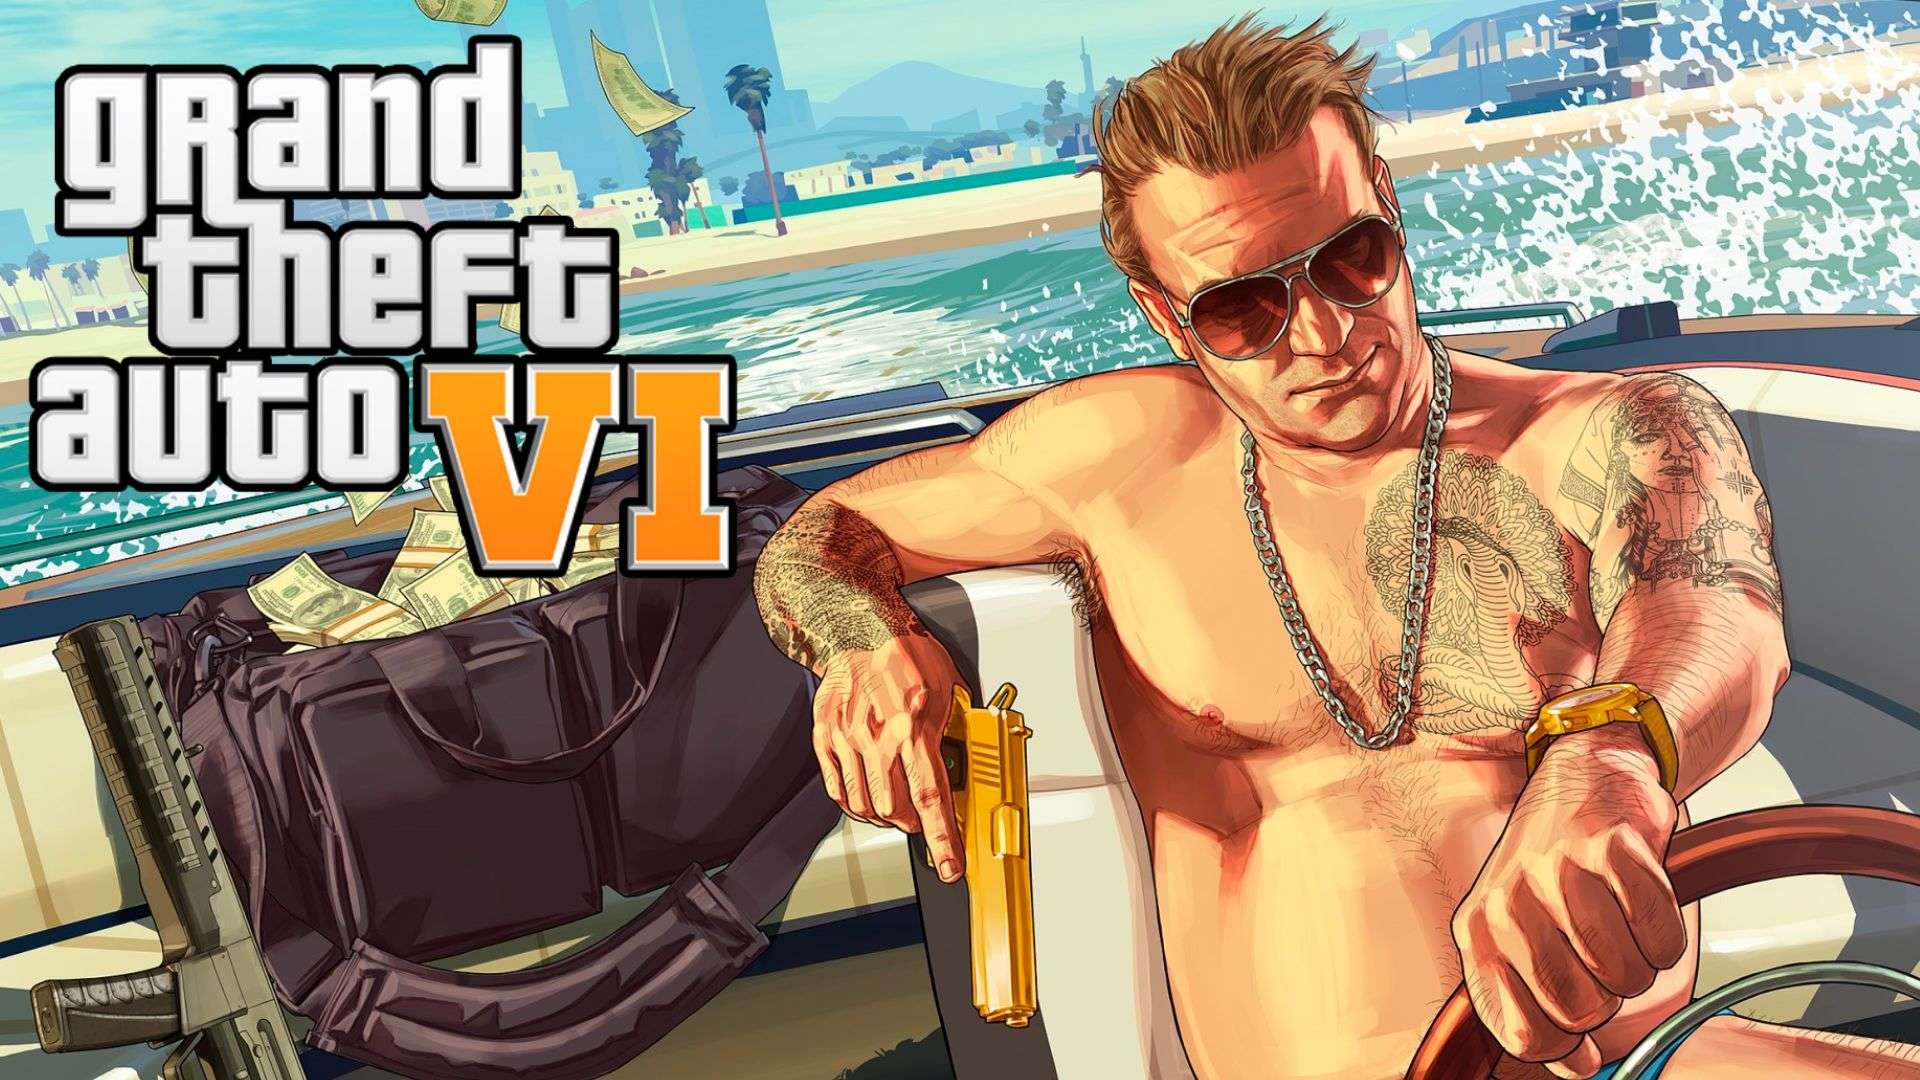 GTA character piloting a boat holding a gun and a bag of money